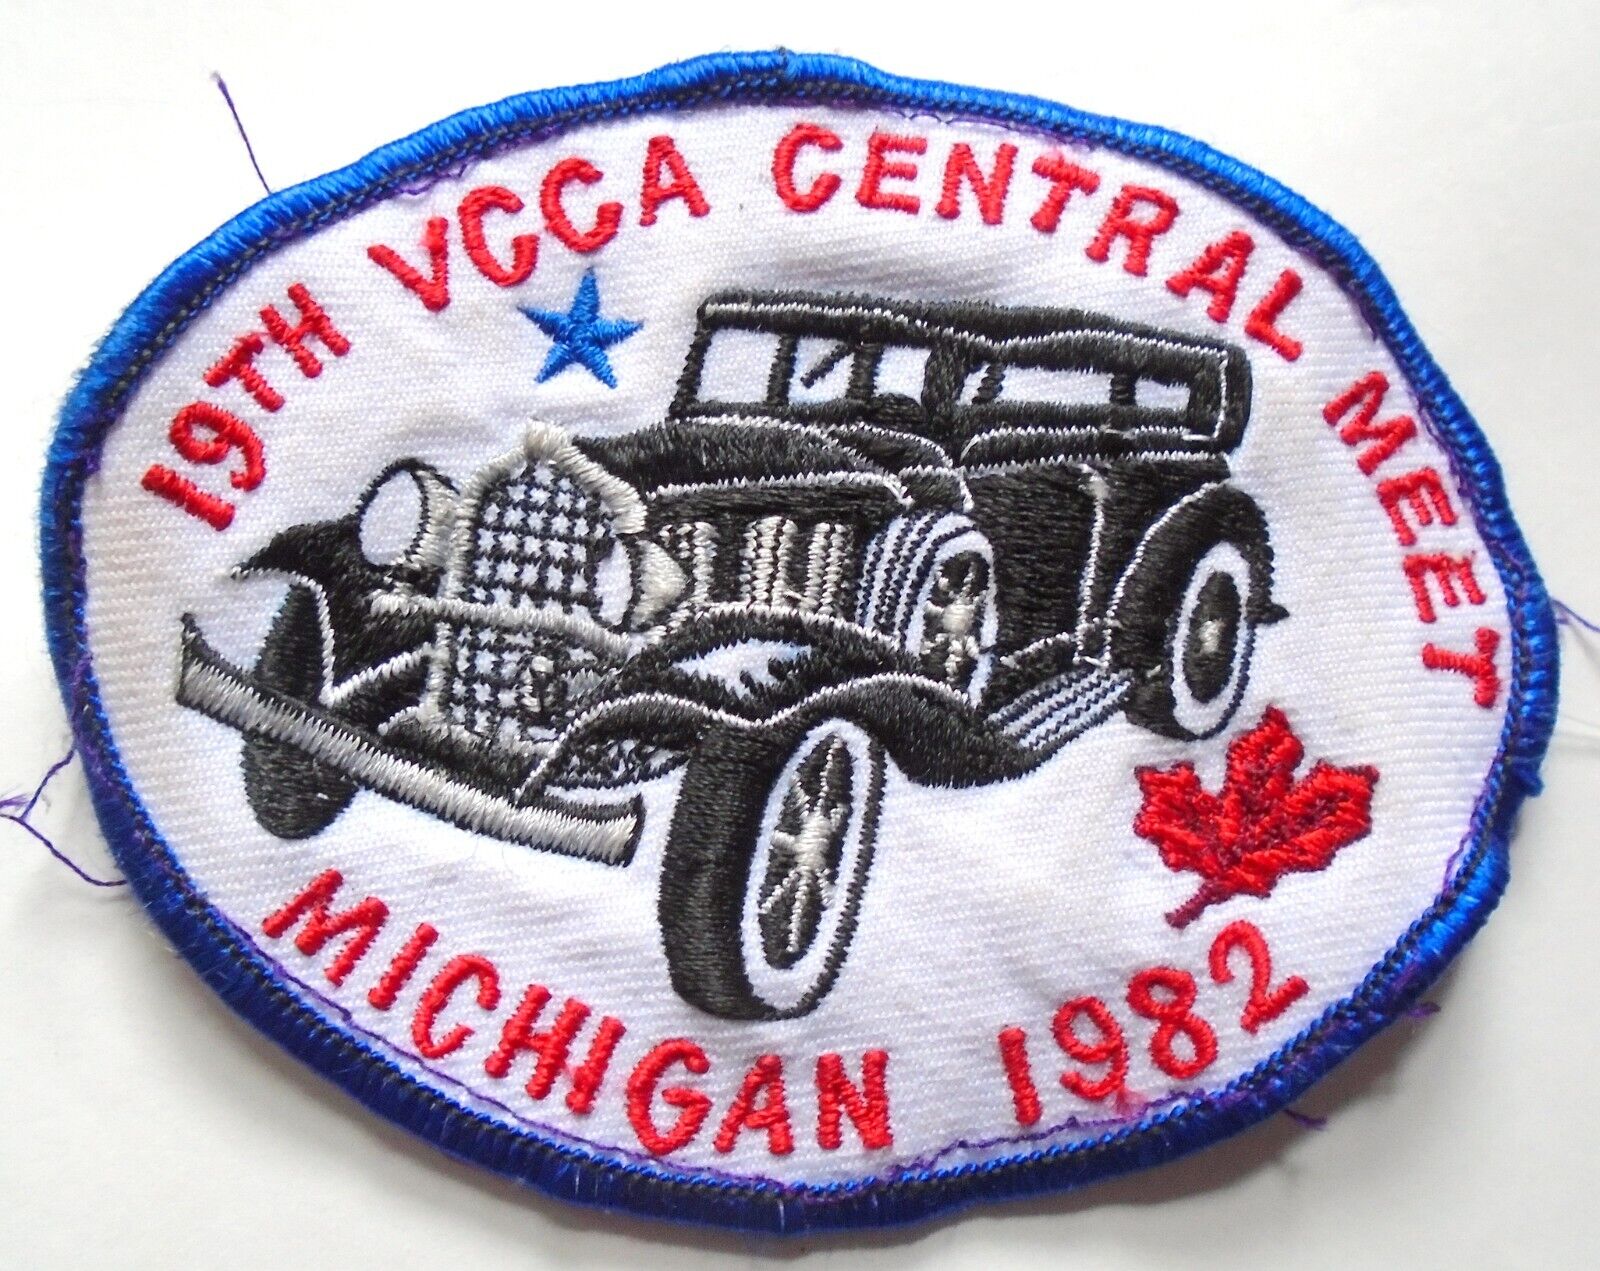 19th VCCA CENTRAL MICHIGAN MEET 1982 EMBROIDERED PATCH